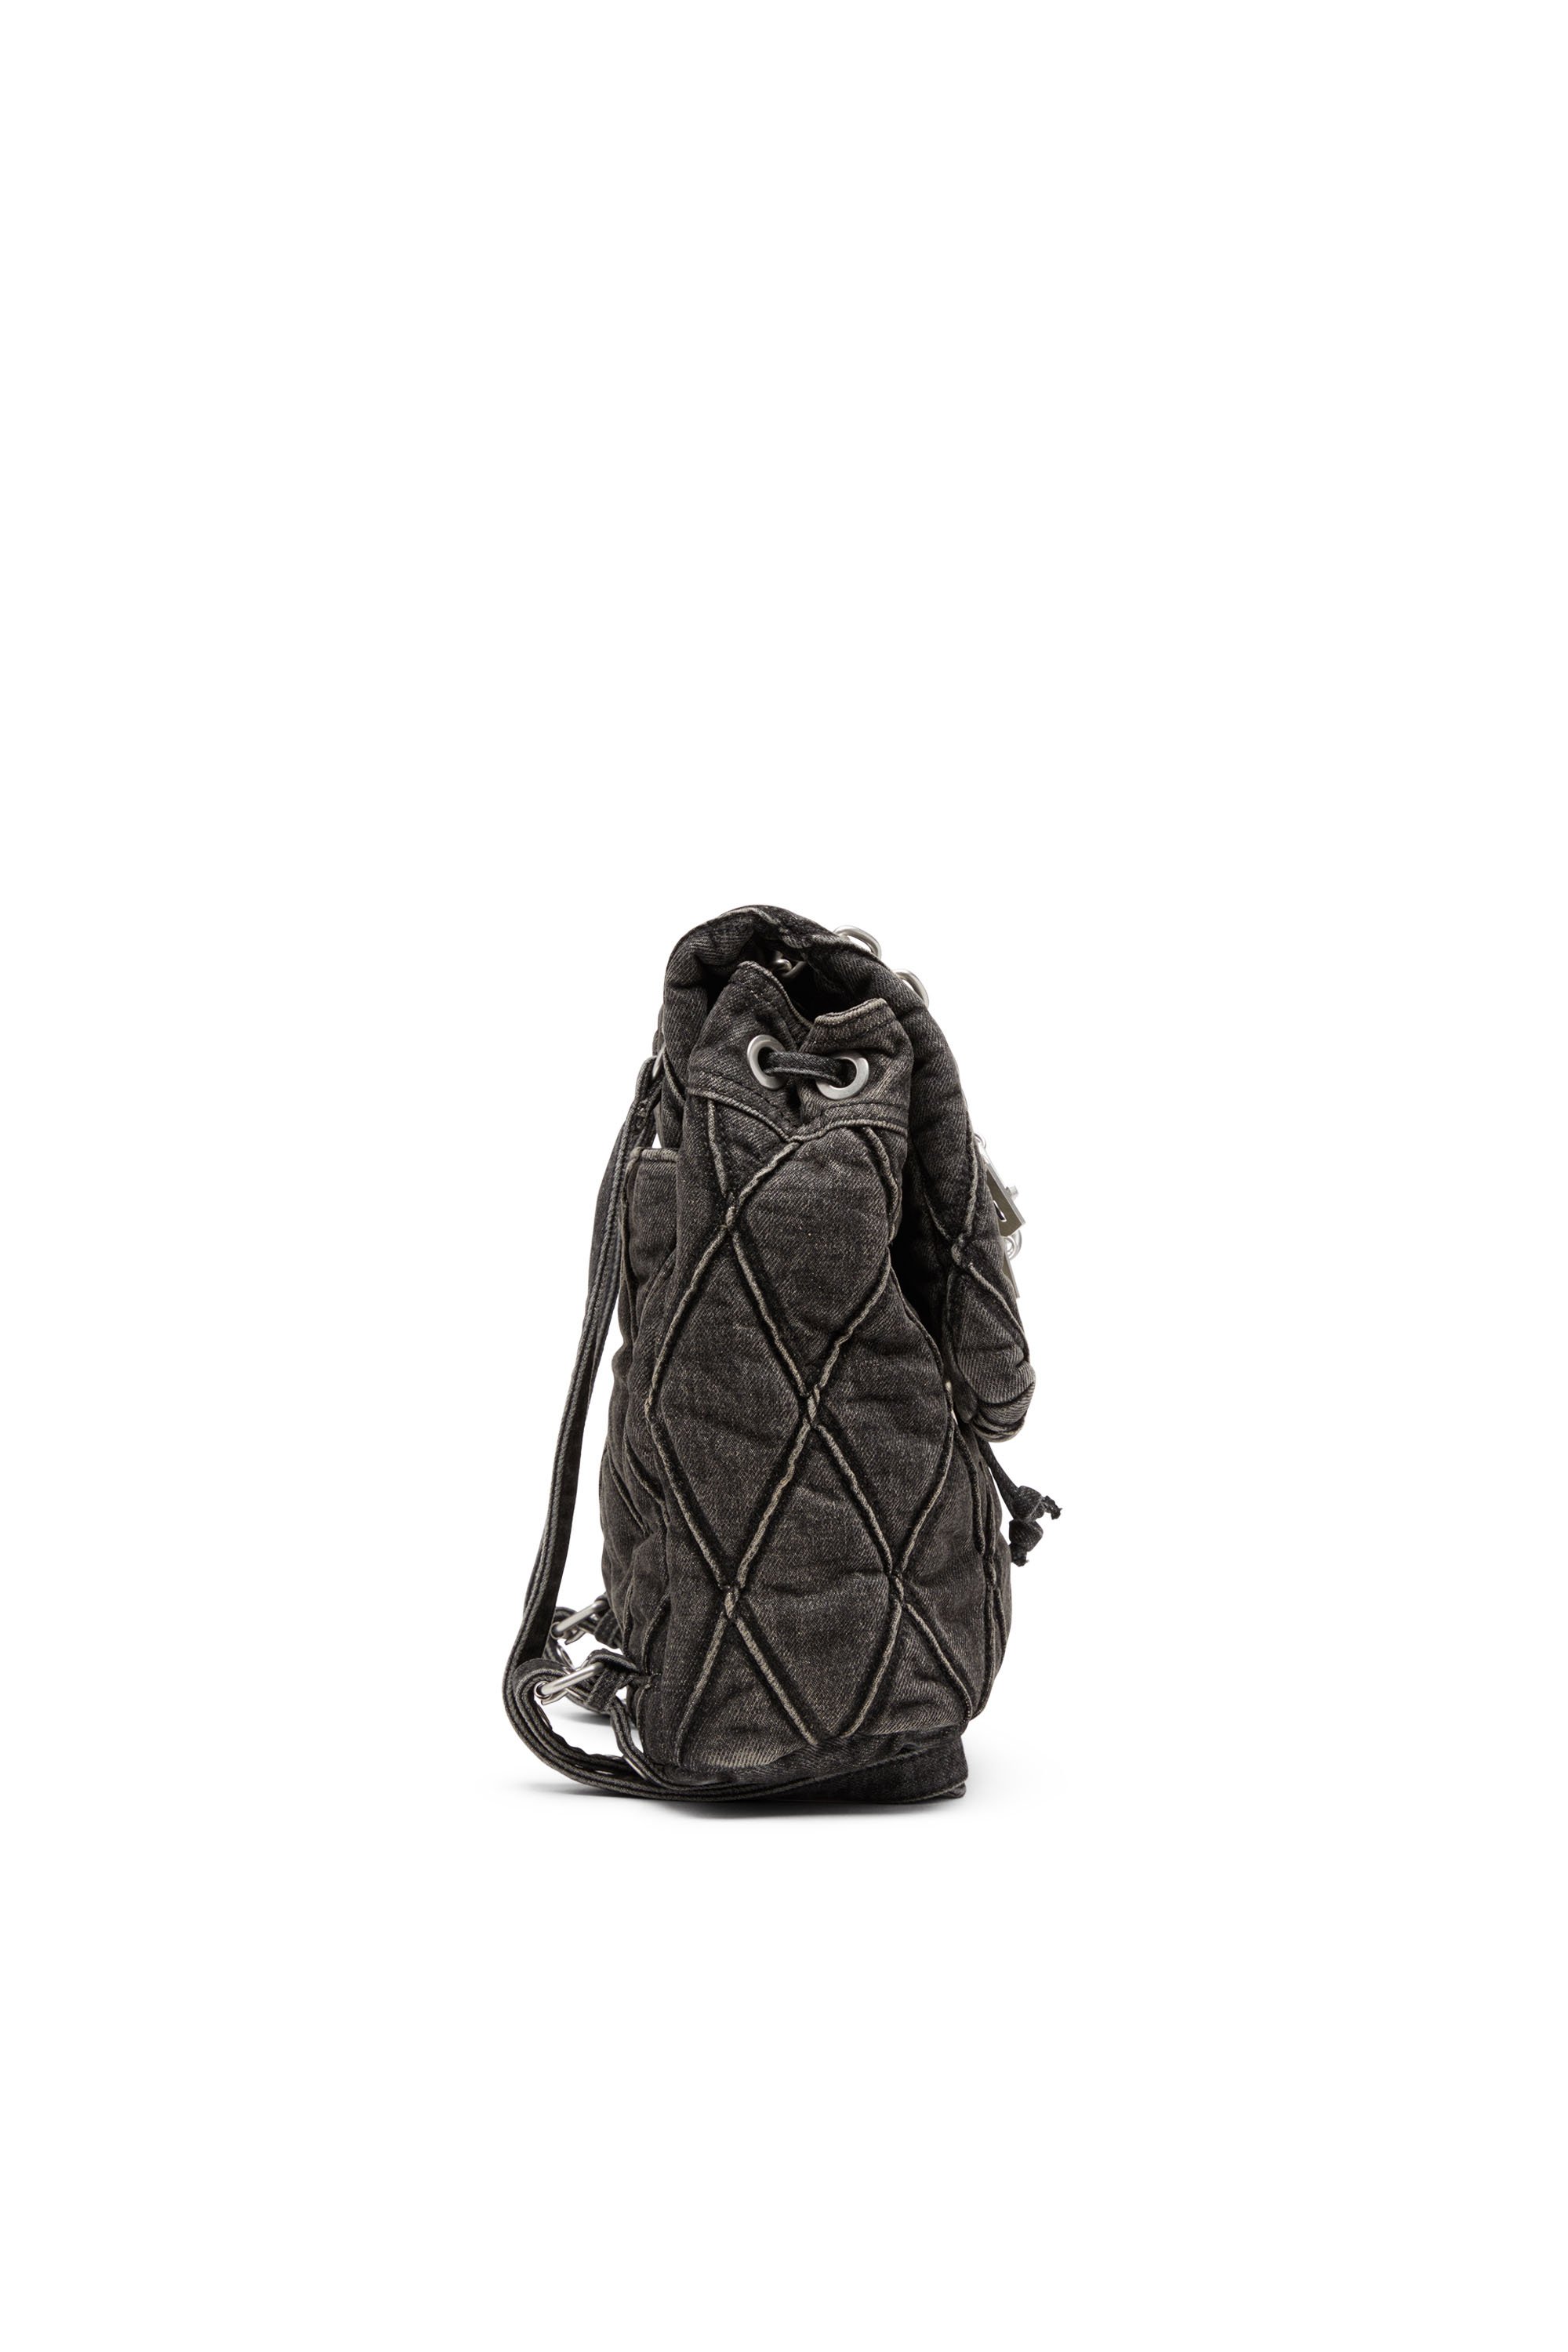 Diesel - CHARM-D BACKPACK S, Female Charm-D S-Backpack in Argyle quilted denim in Black - Image 3